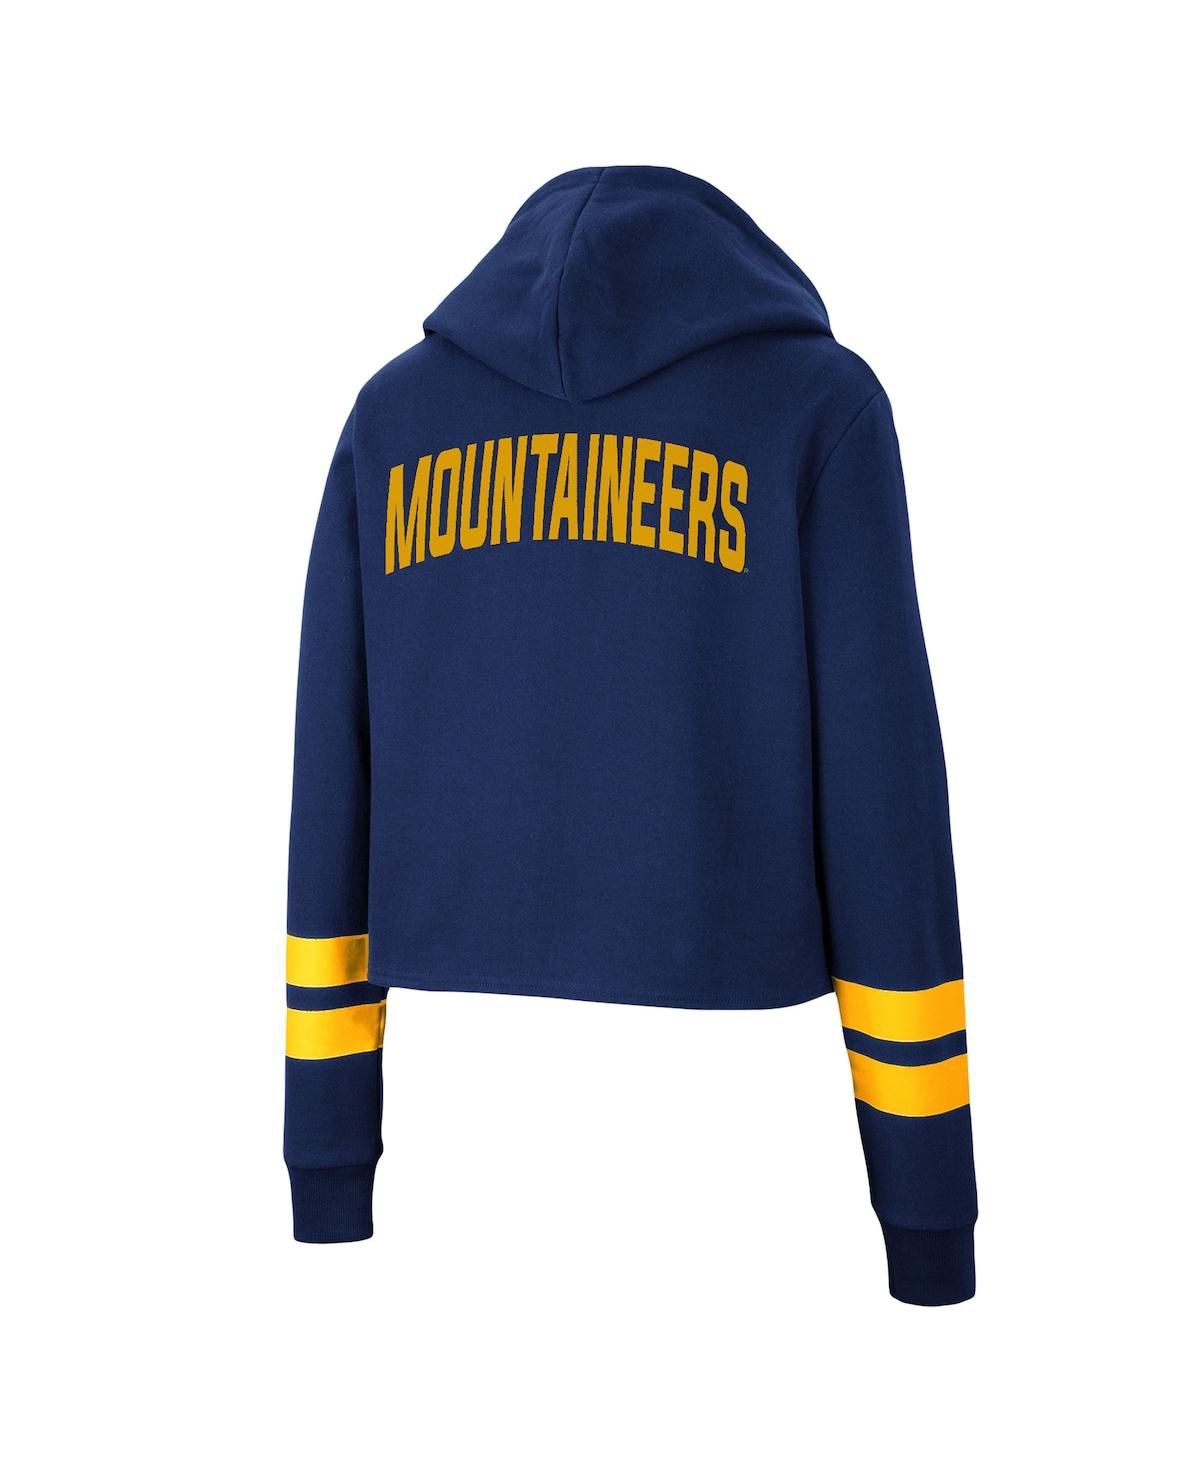 Shop Colosseum Women's  Navy West Virginia Mountaineers Throwback Stripe Cropped Pullover Hoodie